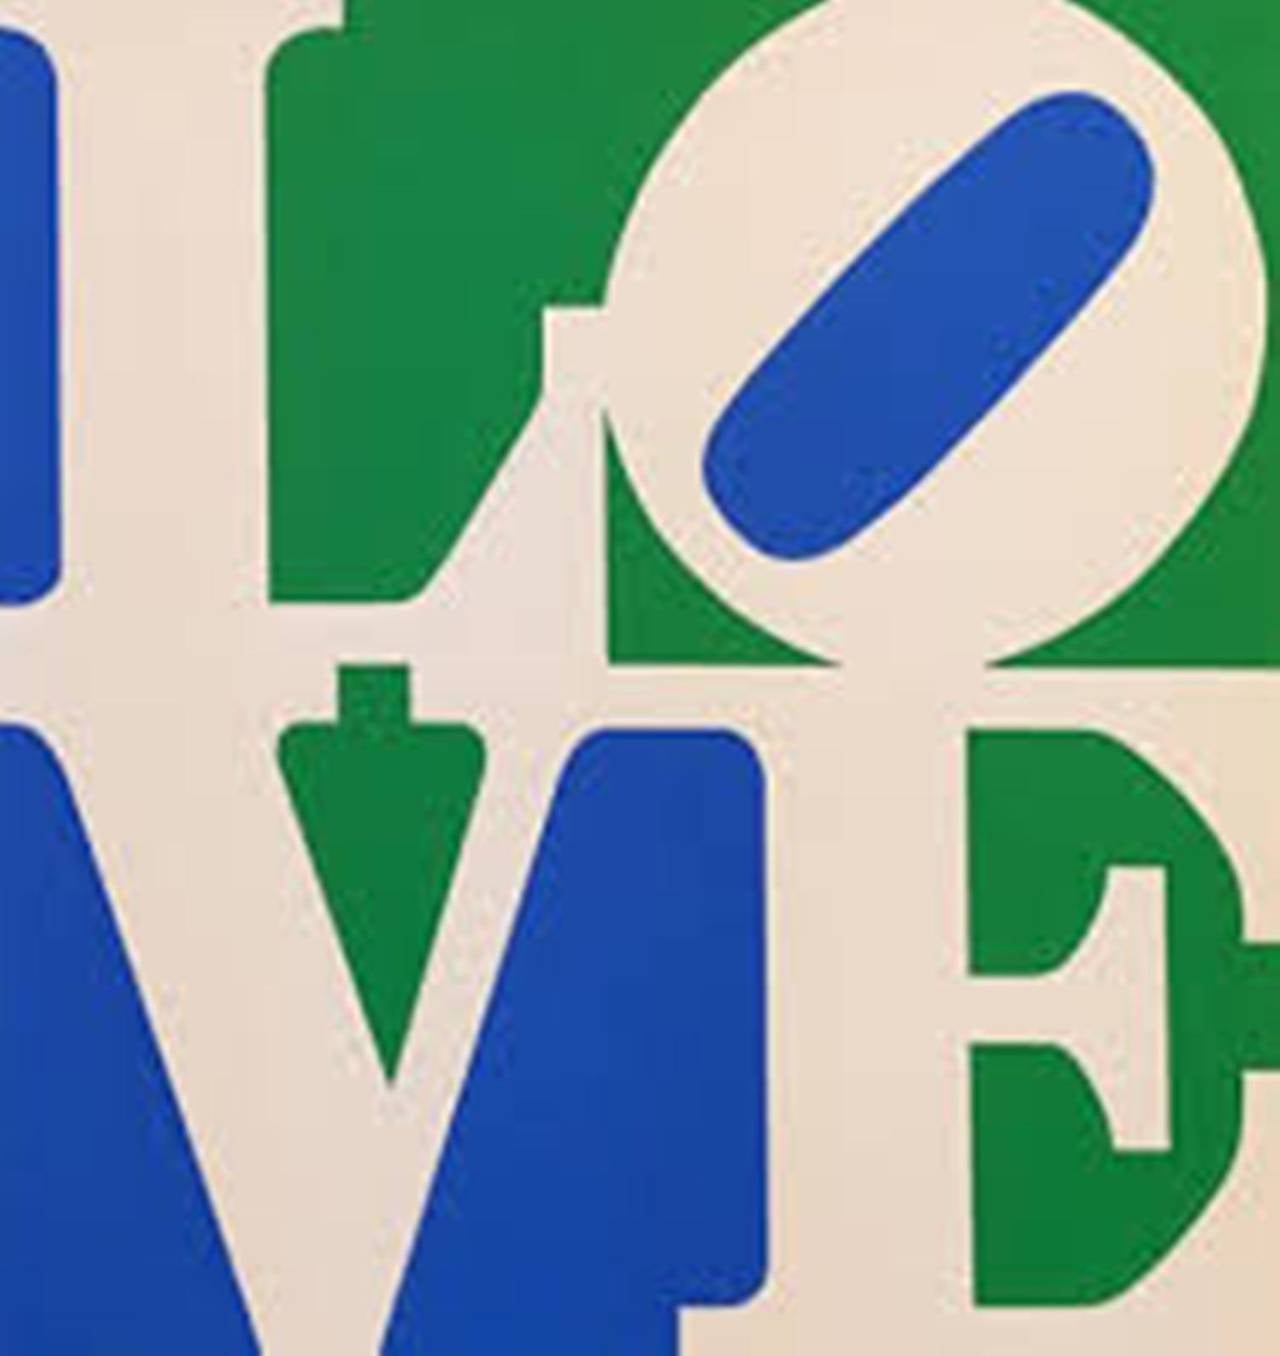 LOVE (White Green Blue) - Print by Robert Indiana